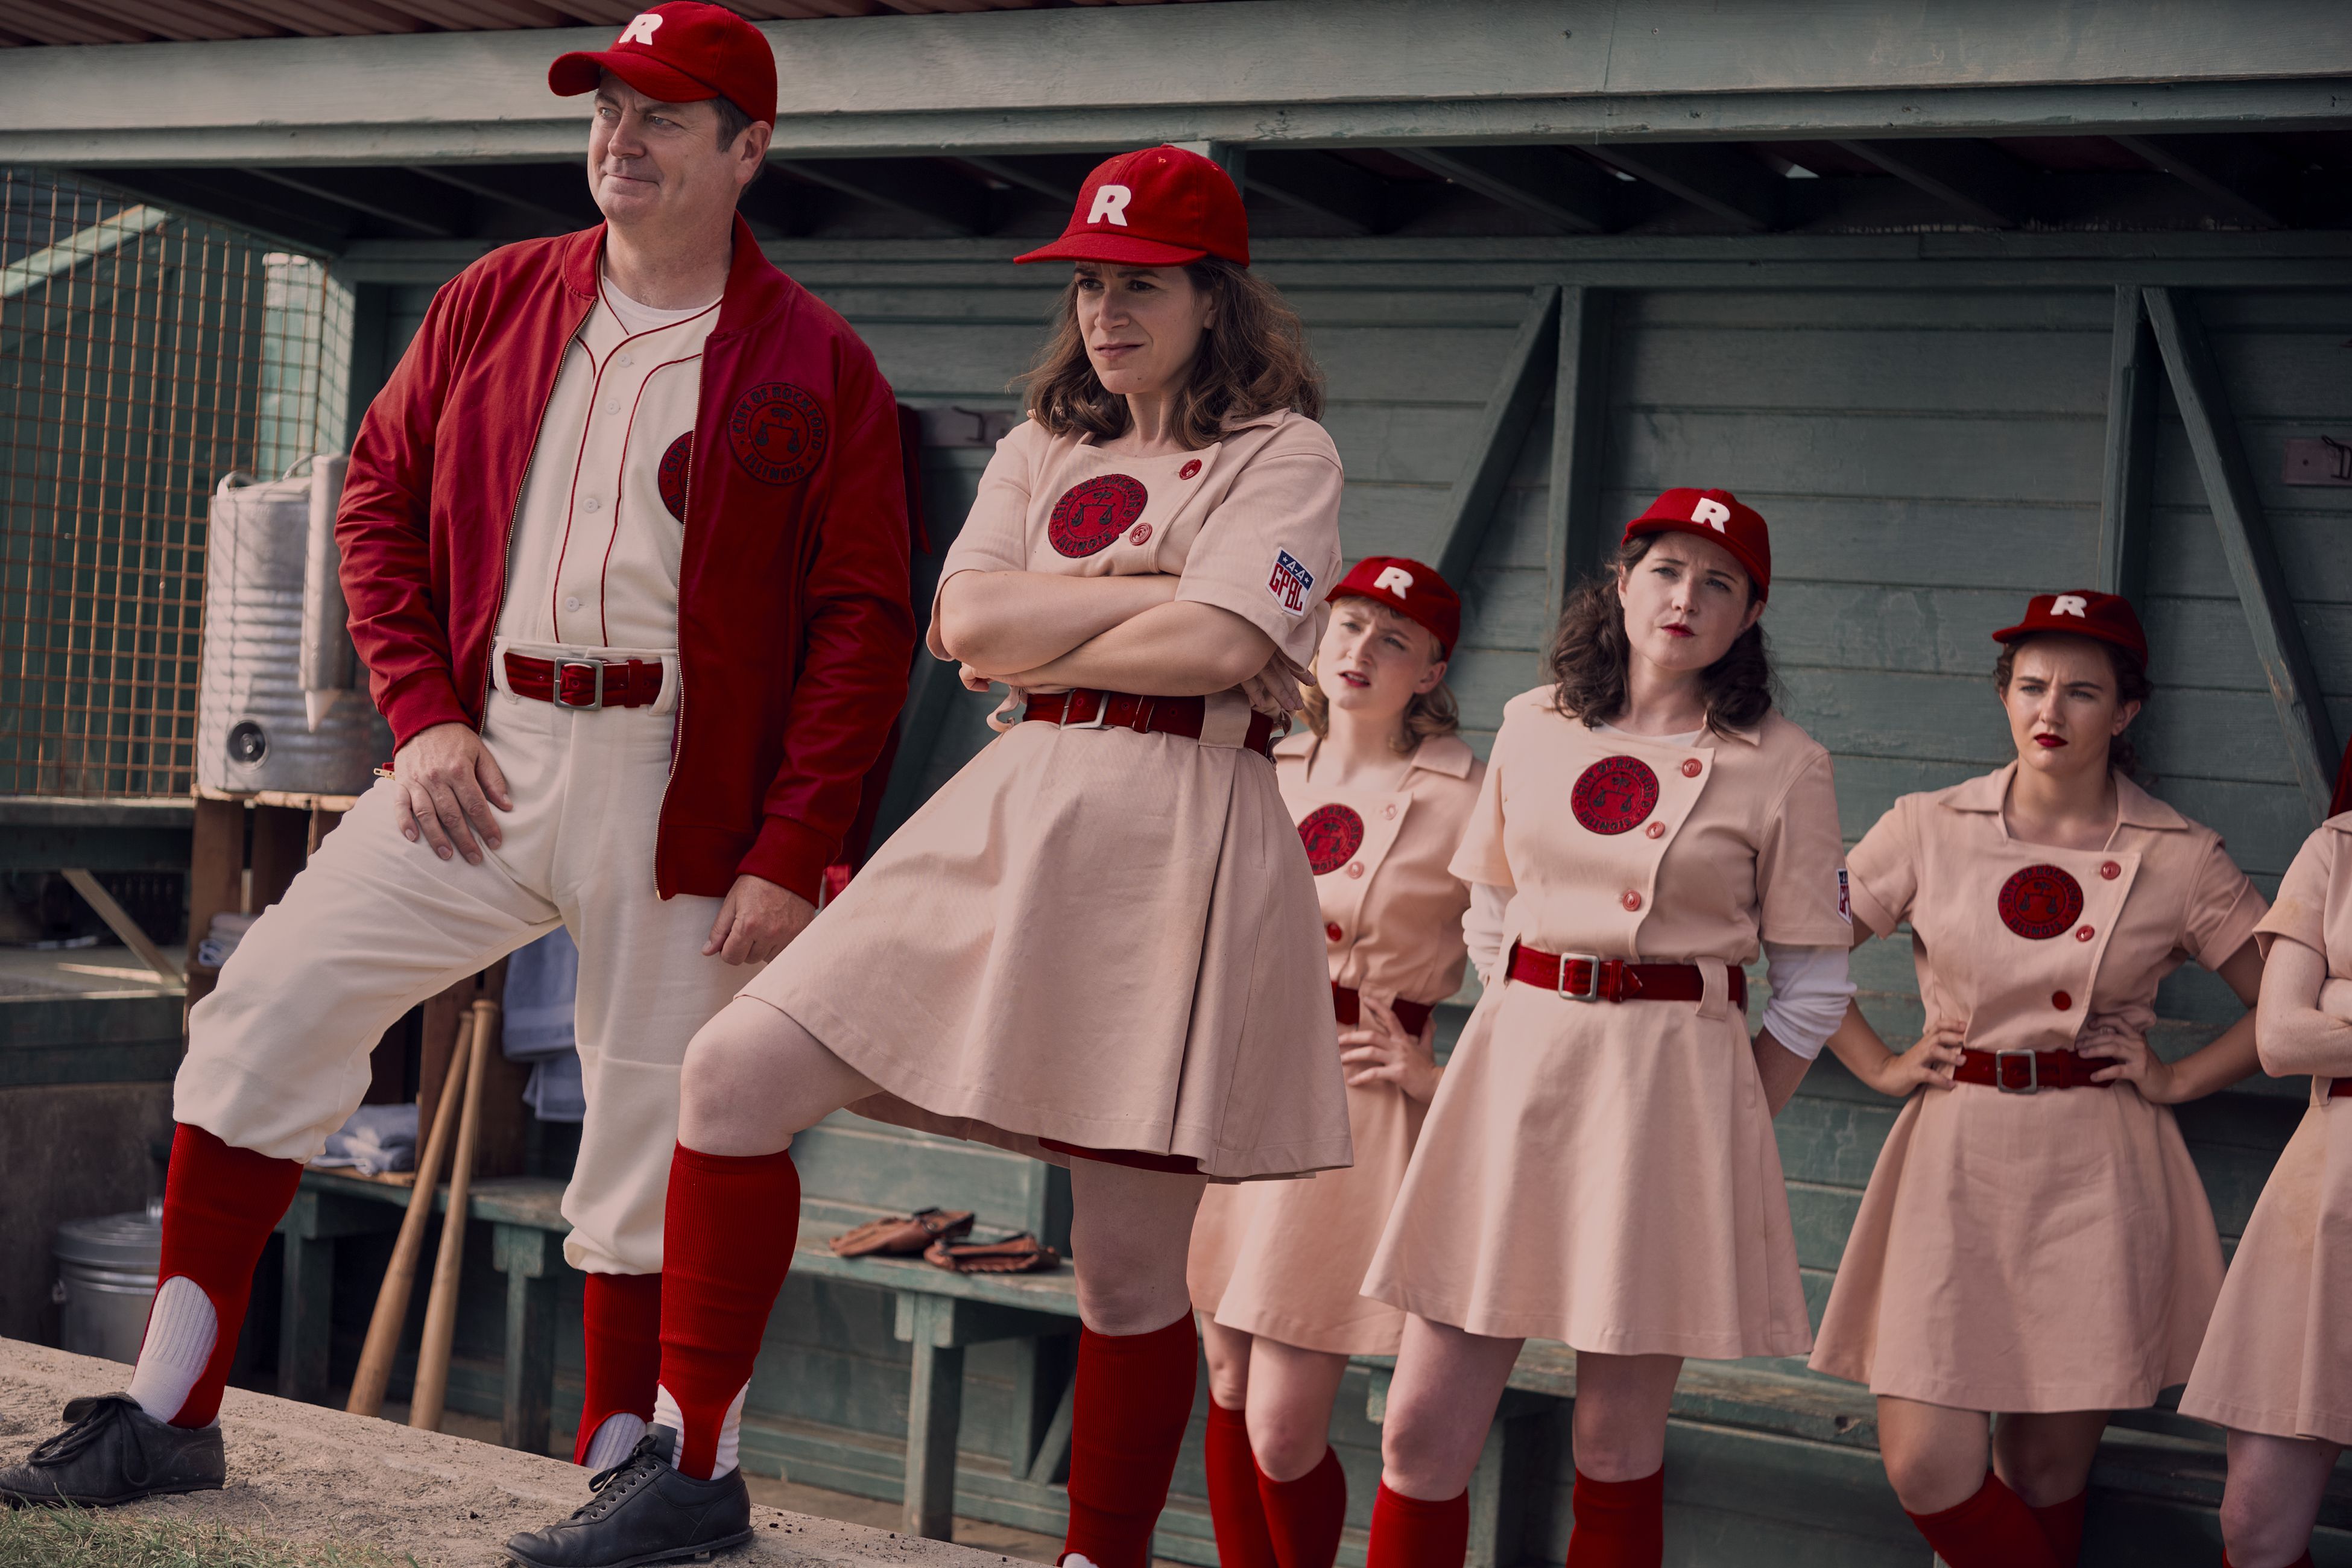 A League of Their Own' Cast: Where Are They Now?